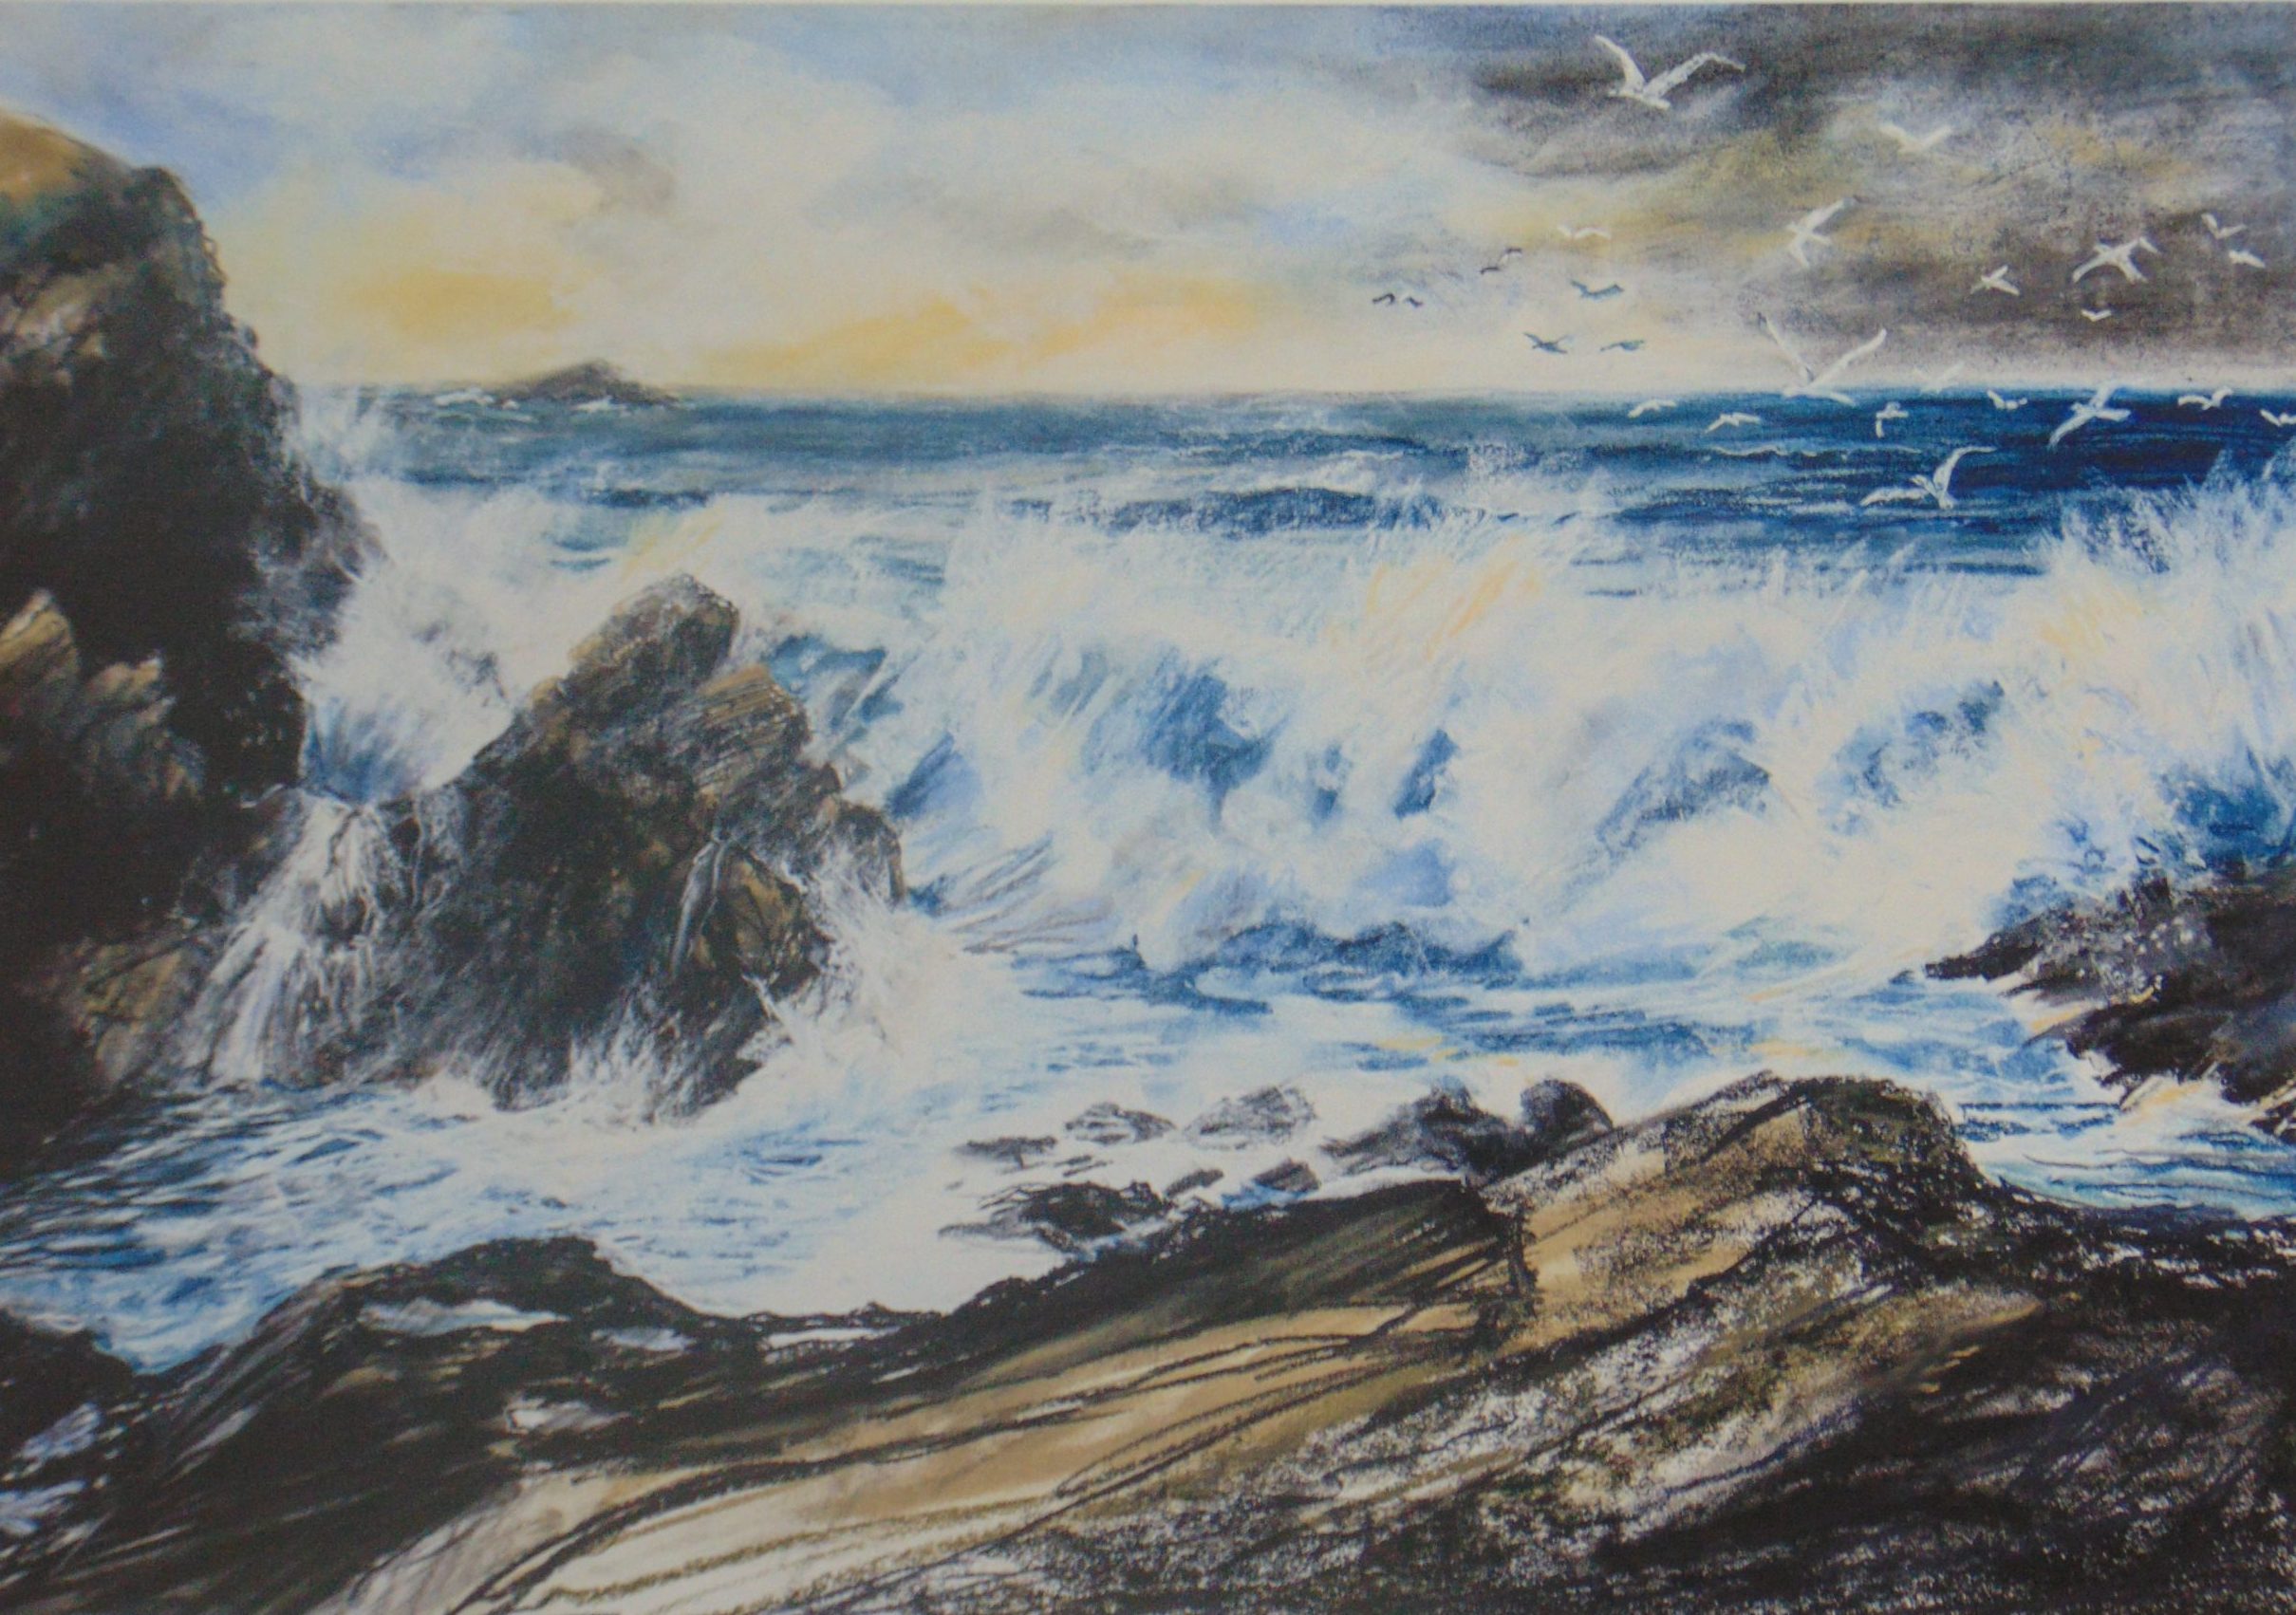 Stormy surf by Lorna Wiles